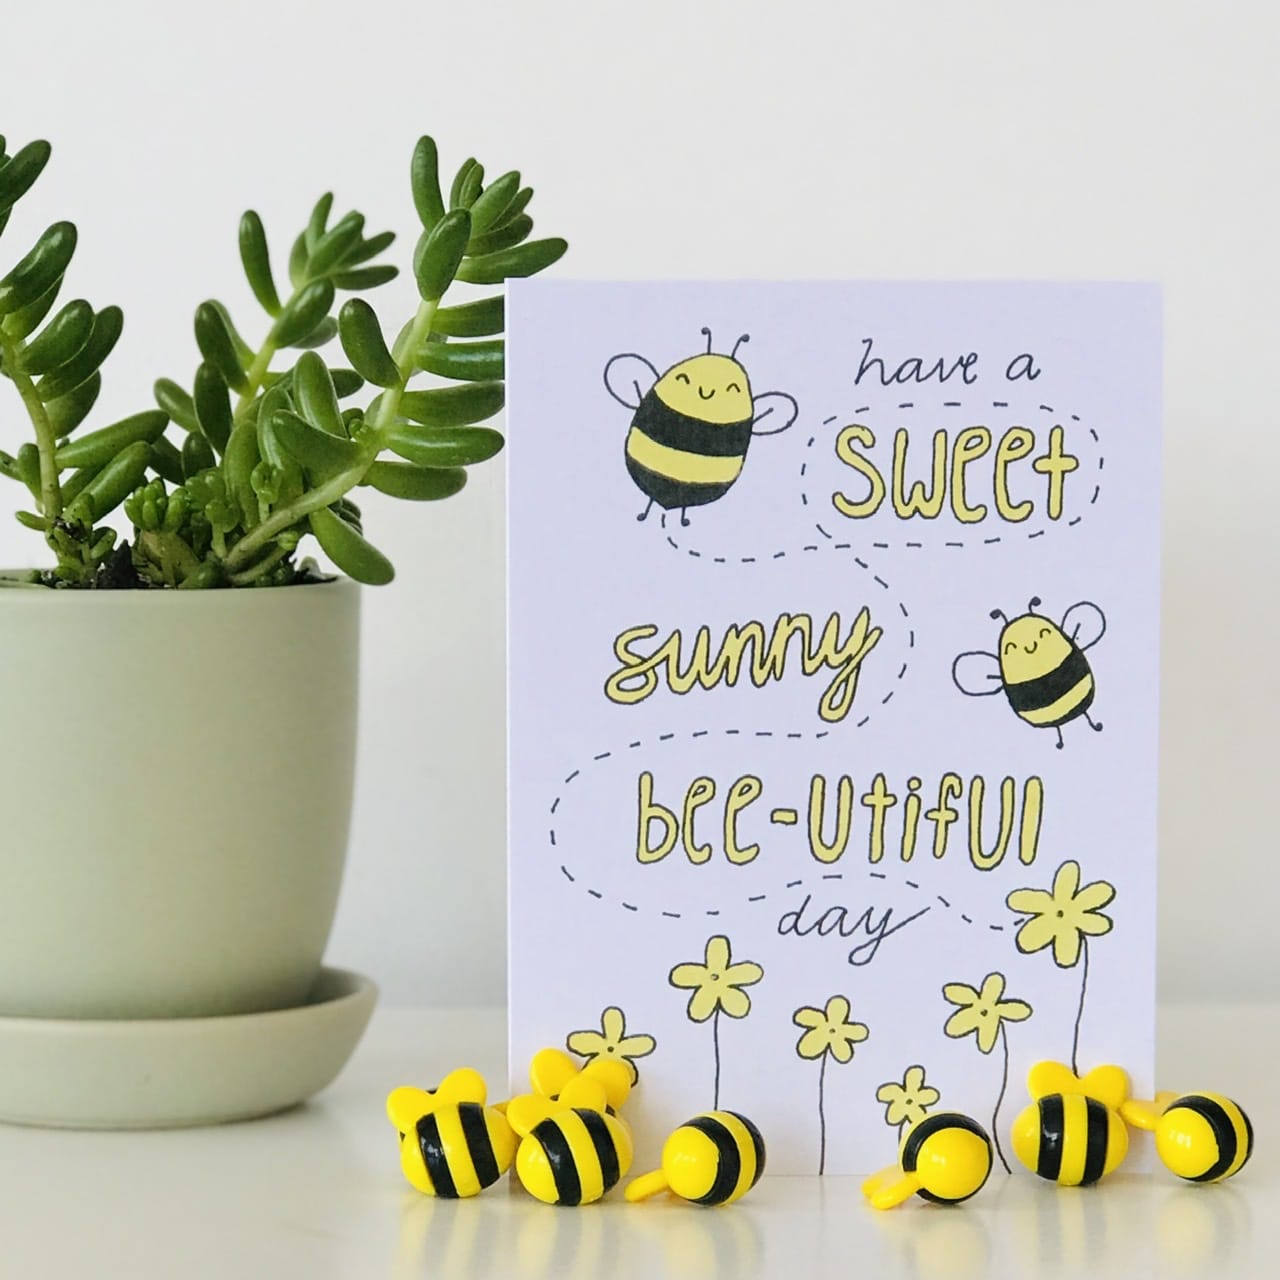 Have a Sweet, Sunny, Bee-utiful Day Card